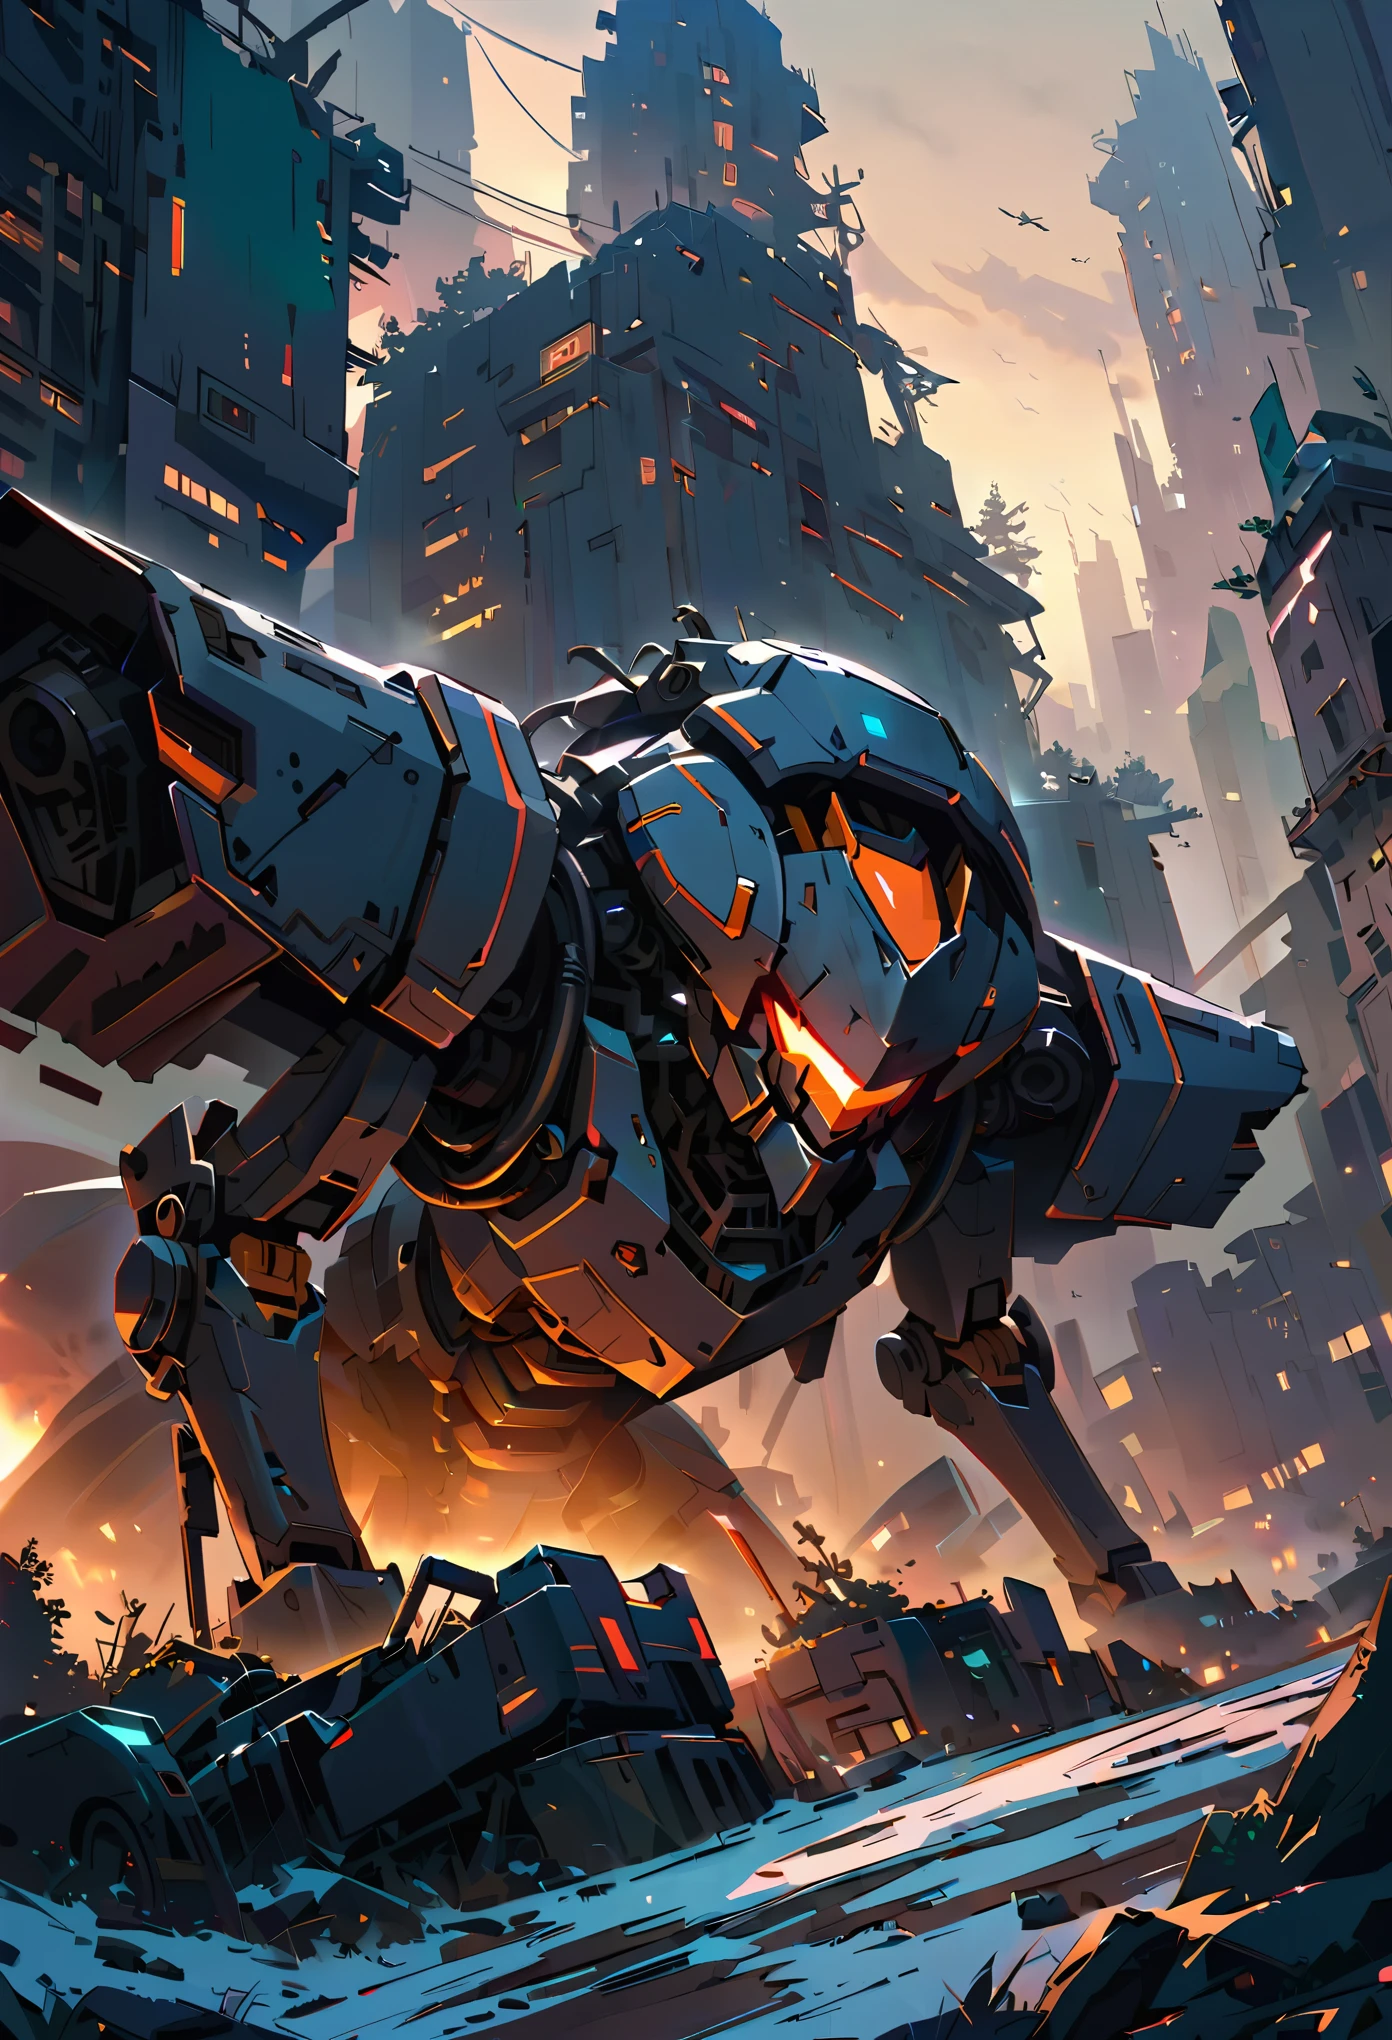 mecha ,winter, dark, dusk,cracked  broken robot, an abandoned old rusty mech, an overgrown , frame weathered and worn, detailed,futuristic city environment, post-apocalyptic